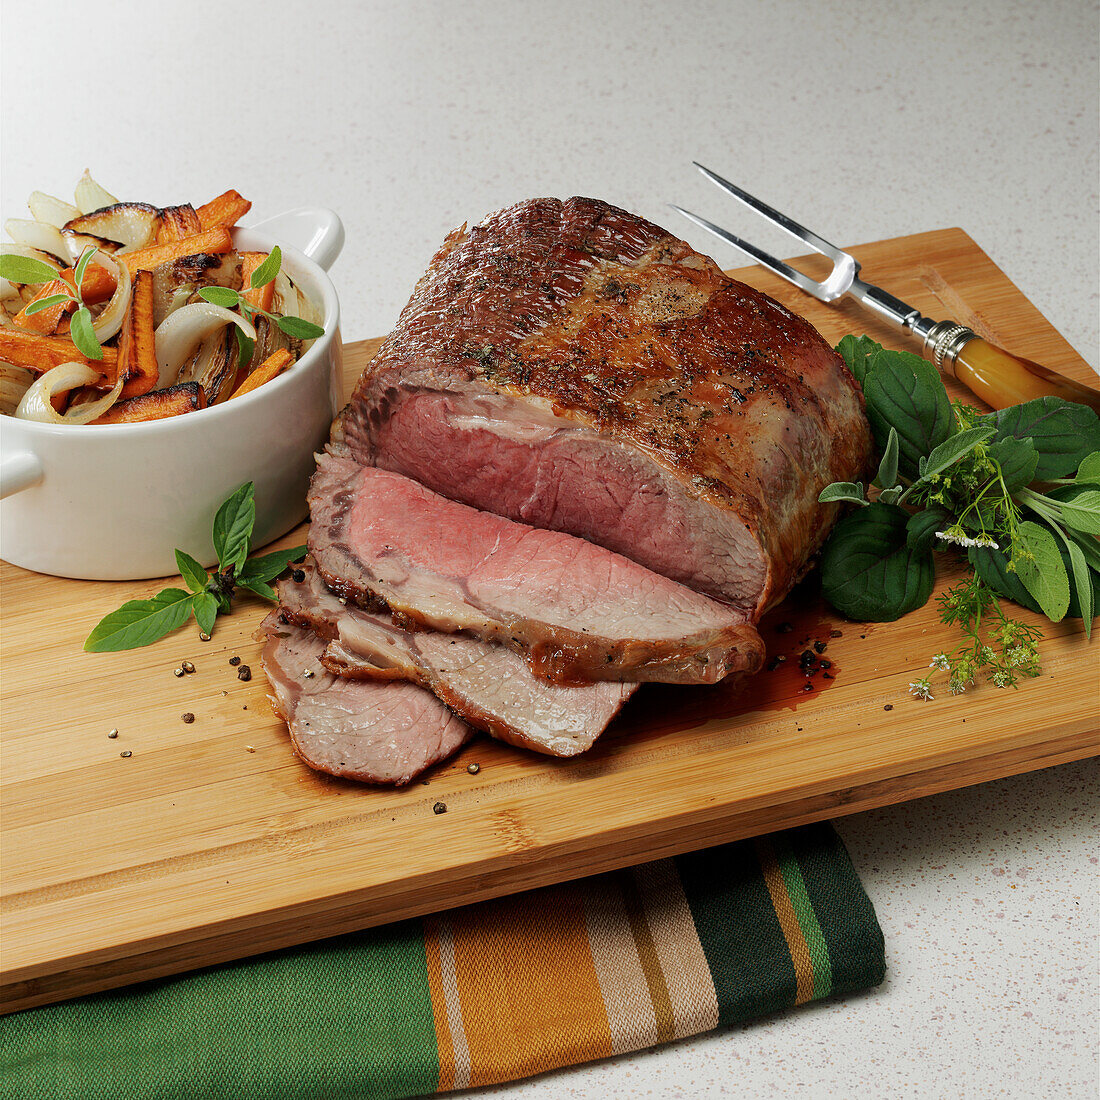 Roast beef with herbs and oven roasted vegetables